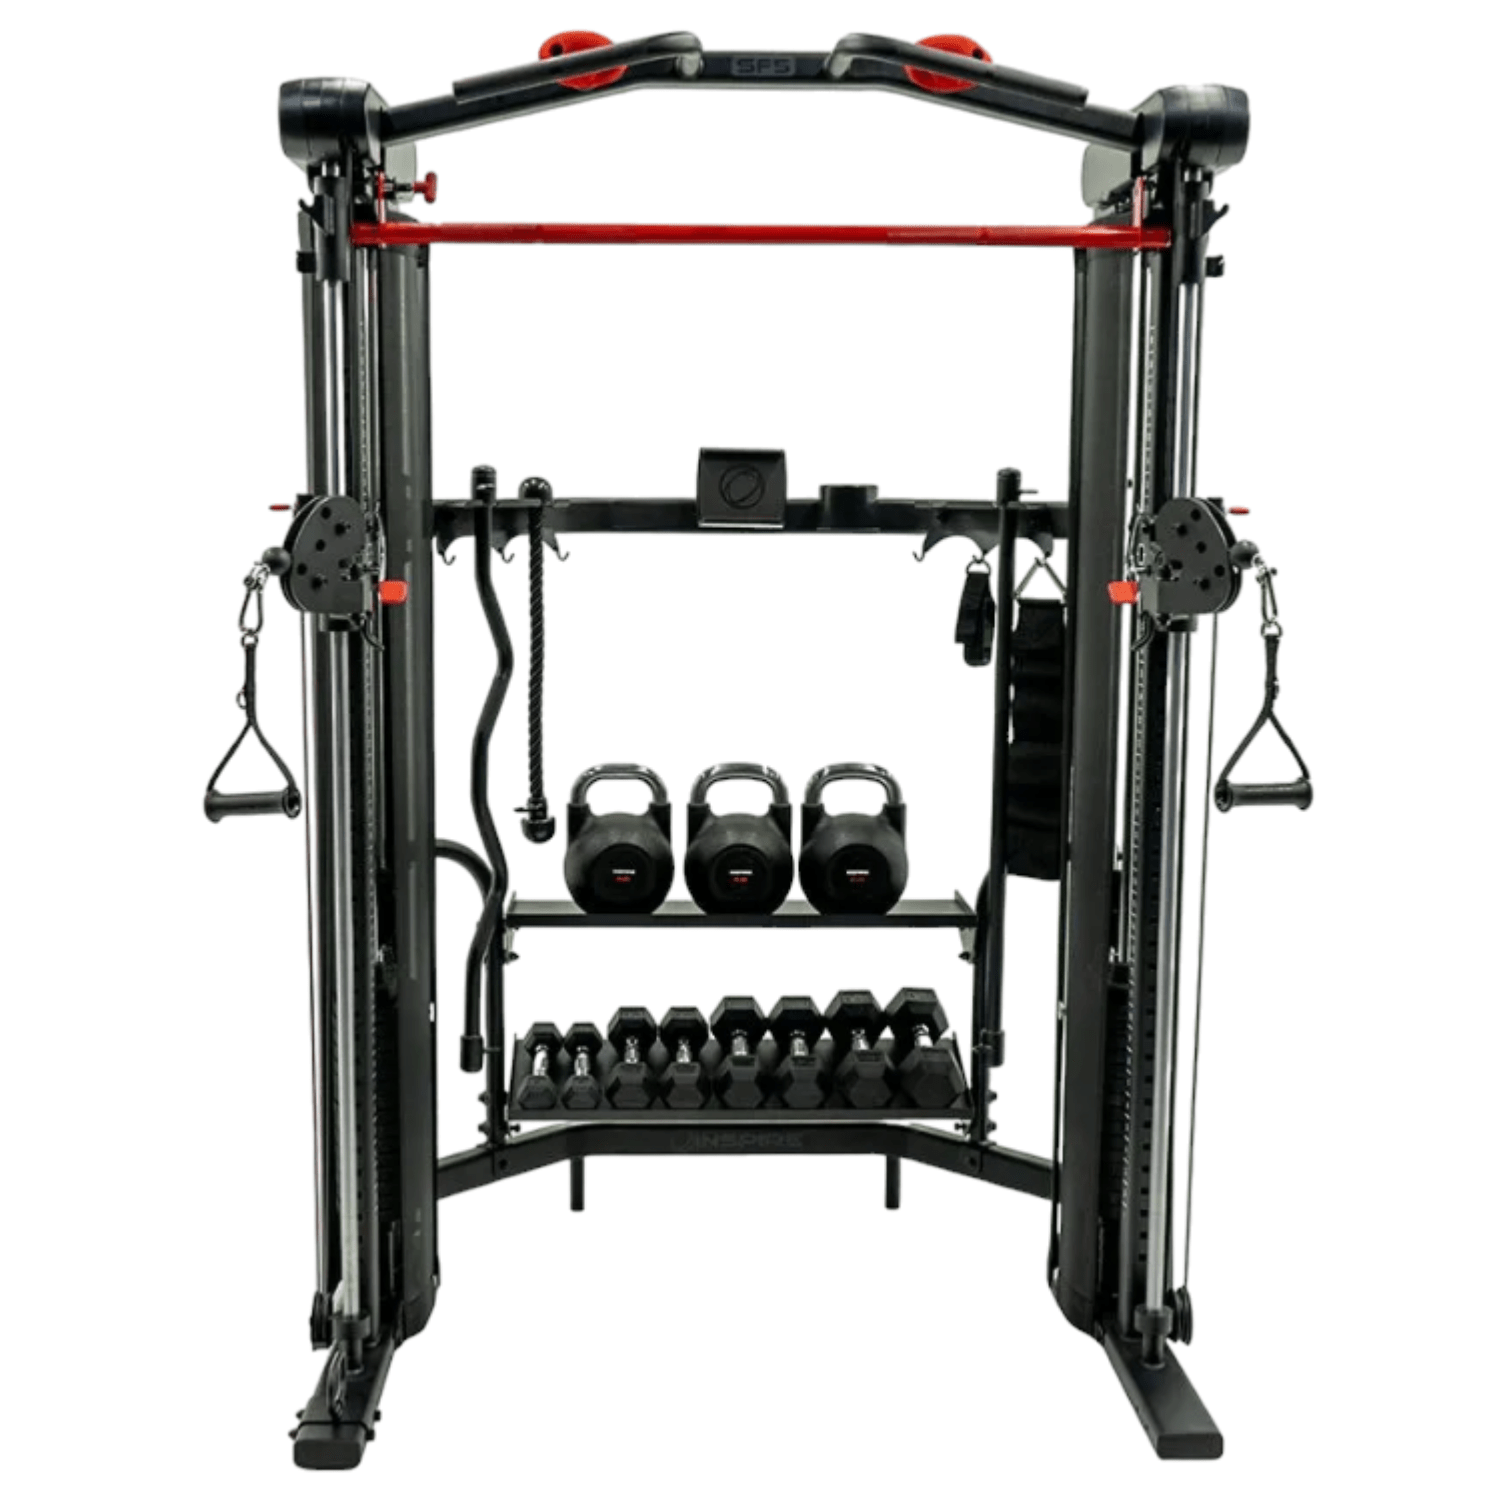 Inspire Fitness M2 Multi-gym Demo: Available at Flaman Fitness 